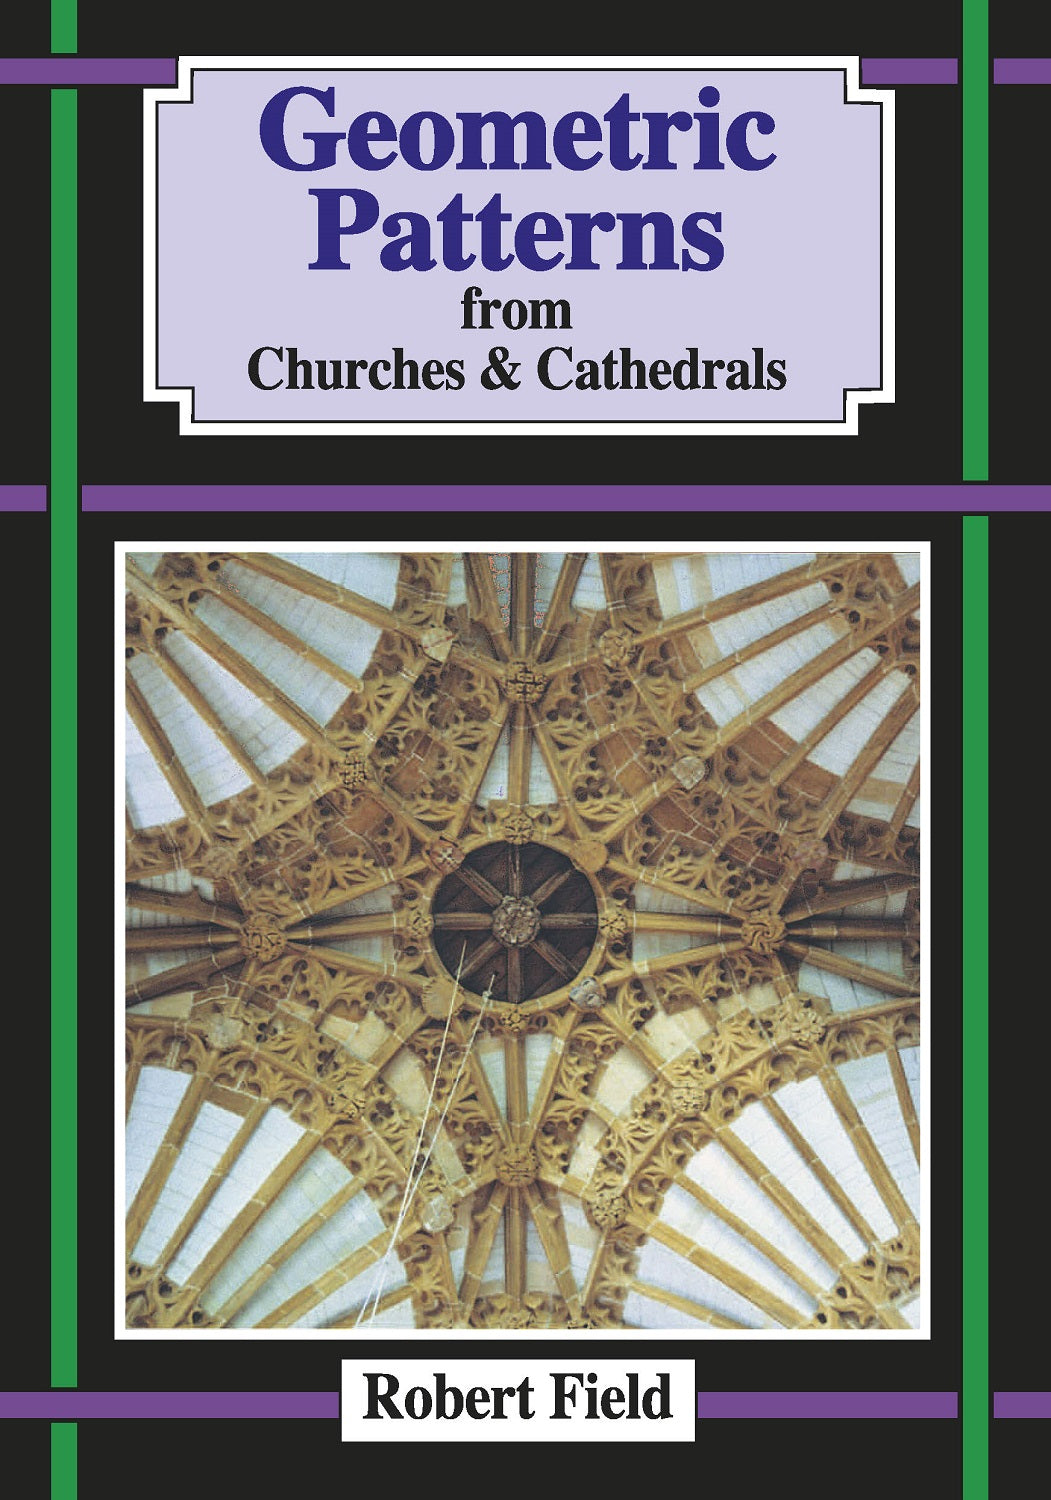 Geometric Patterns from Churches and Cathedrals